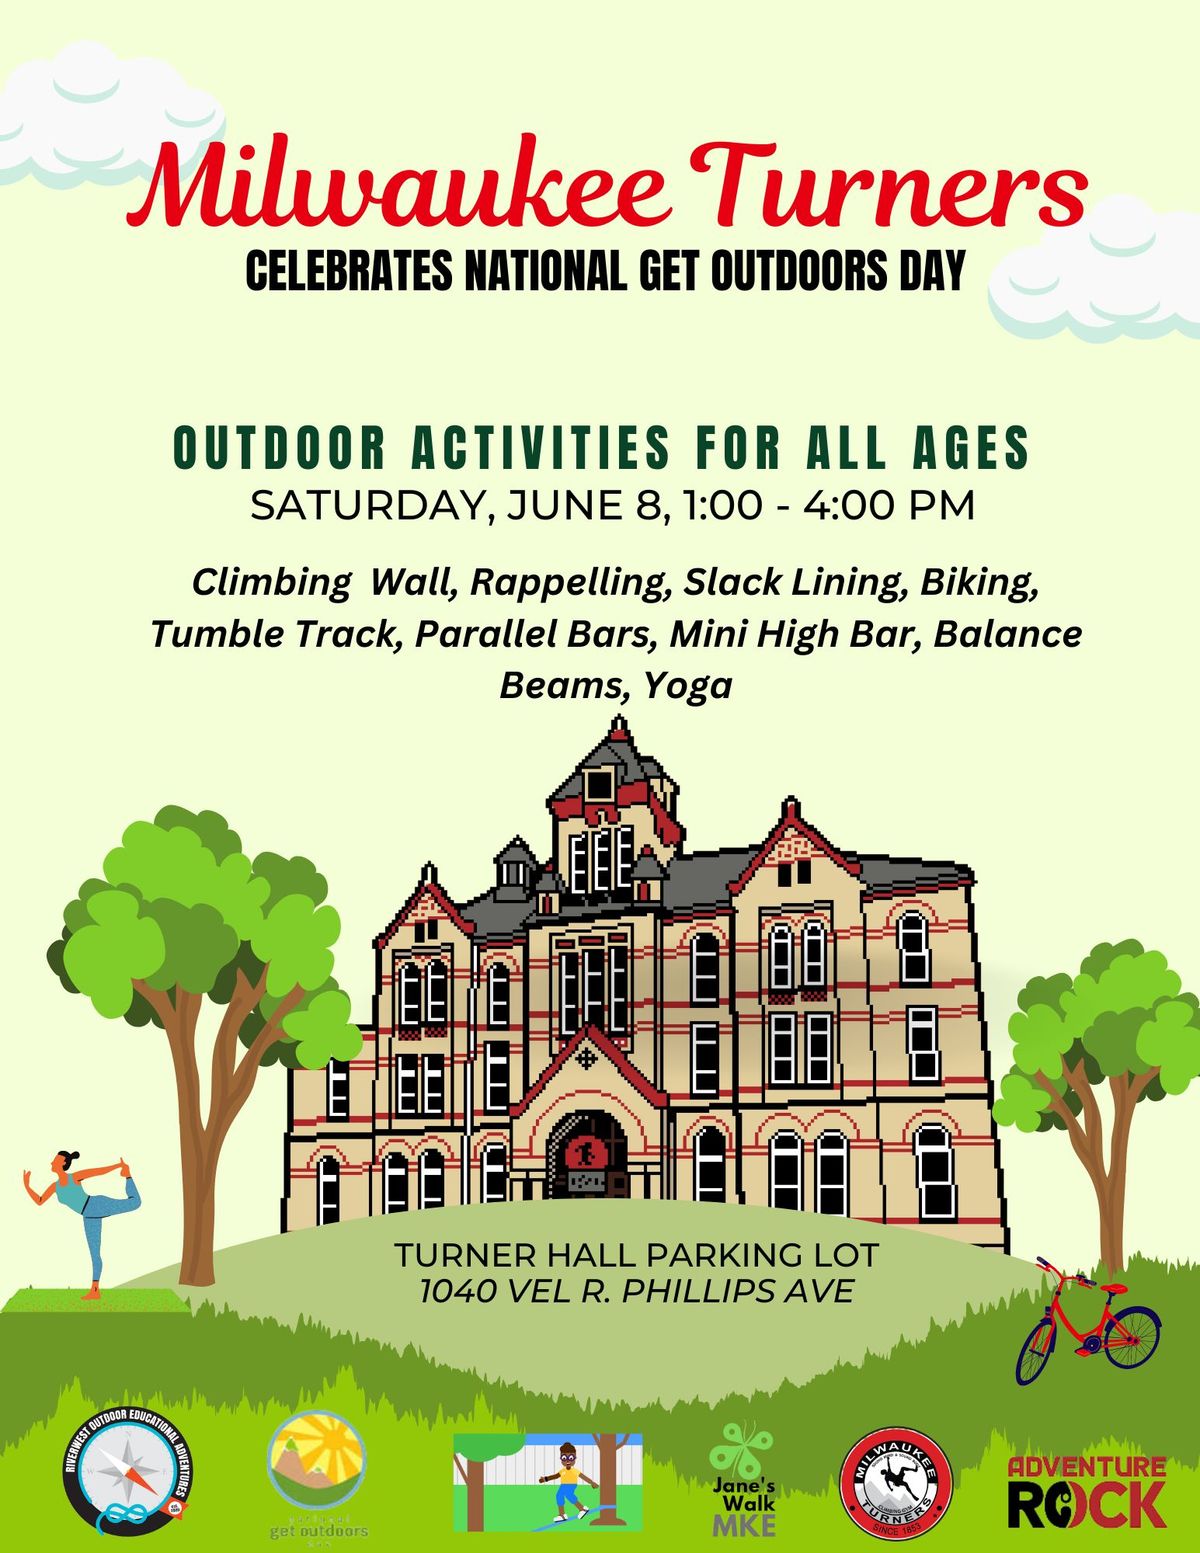 Get Outdoors Day with the Milwaukee Turners